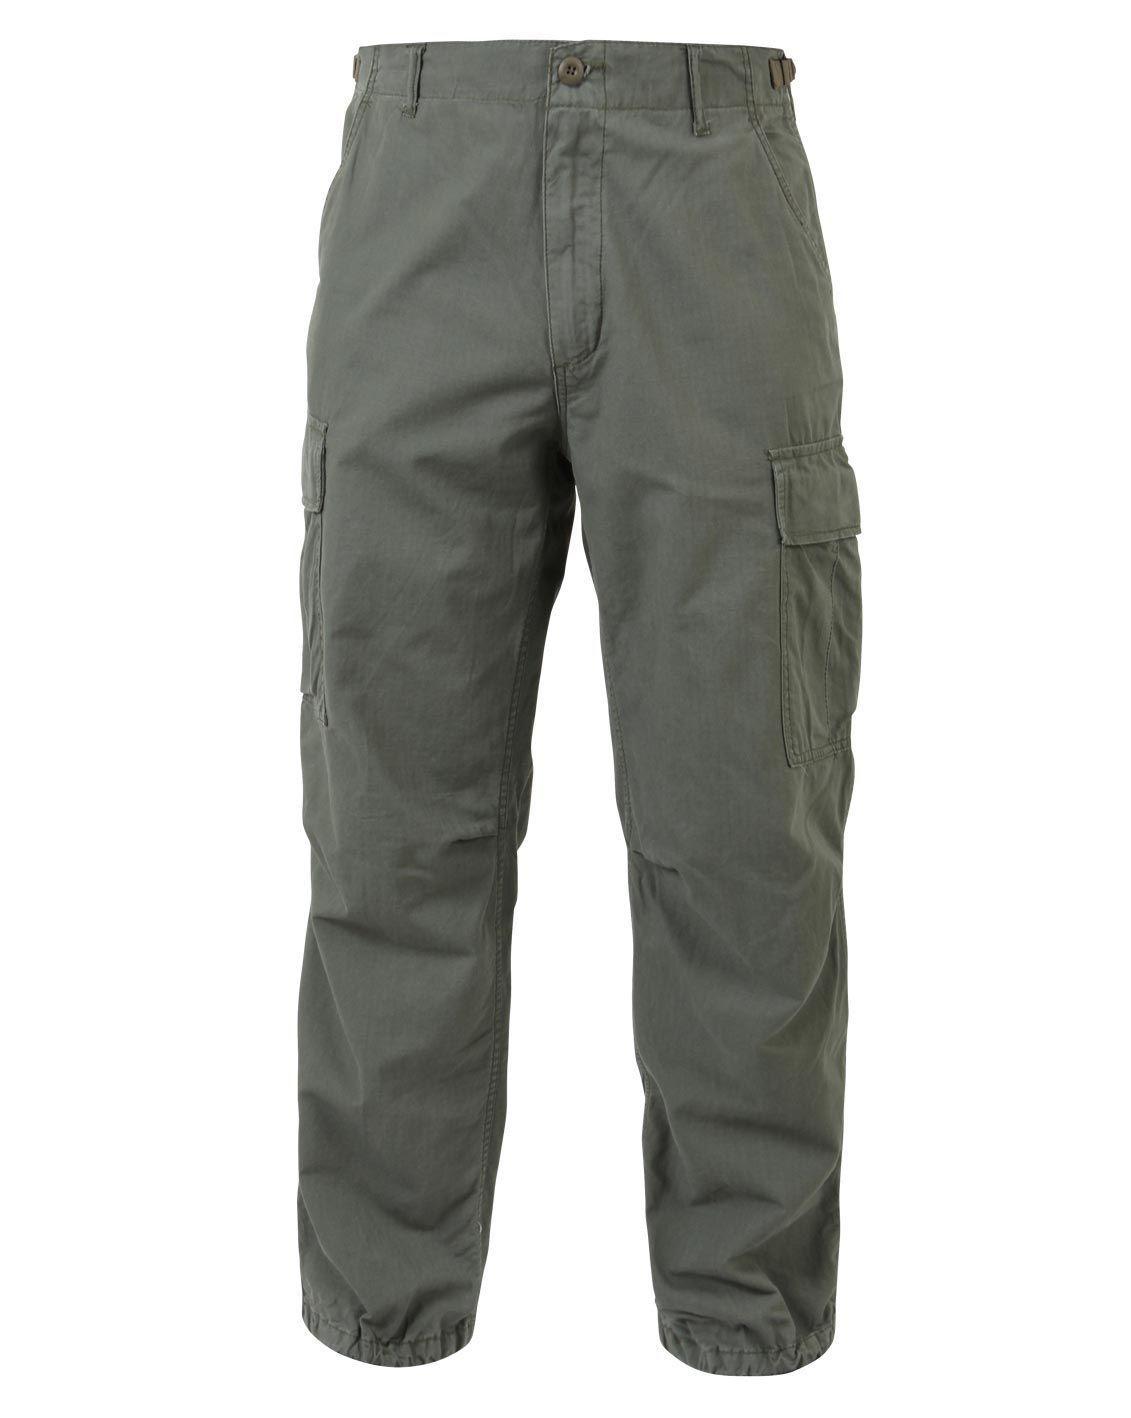 Rothco Fatigue Bukser i Rip-Stop - Washed (Oliven, XL)